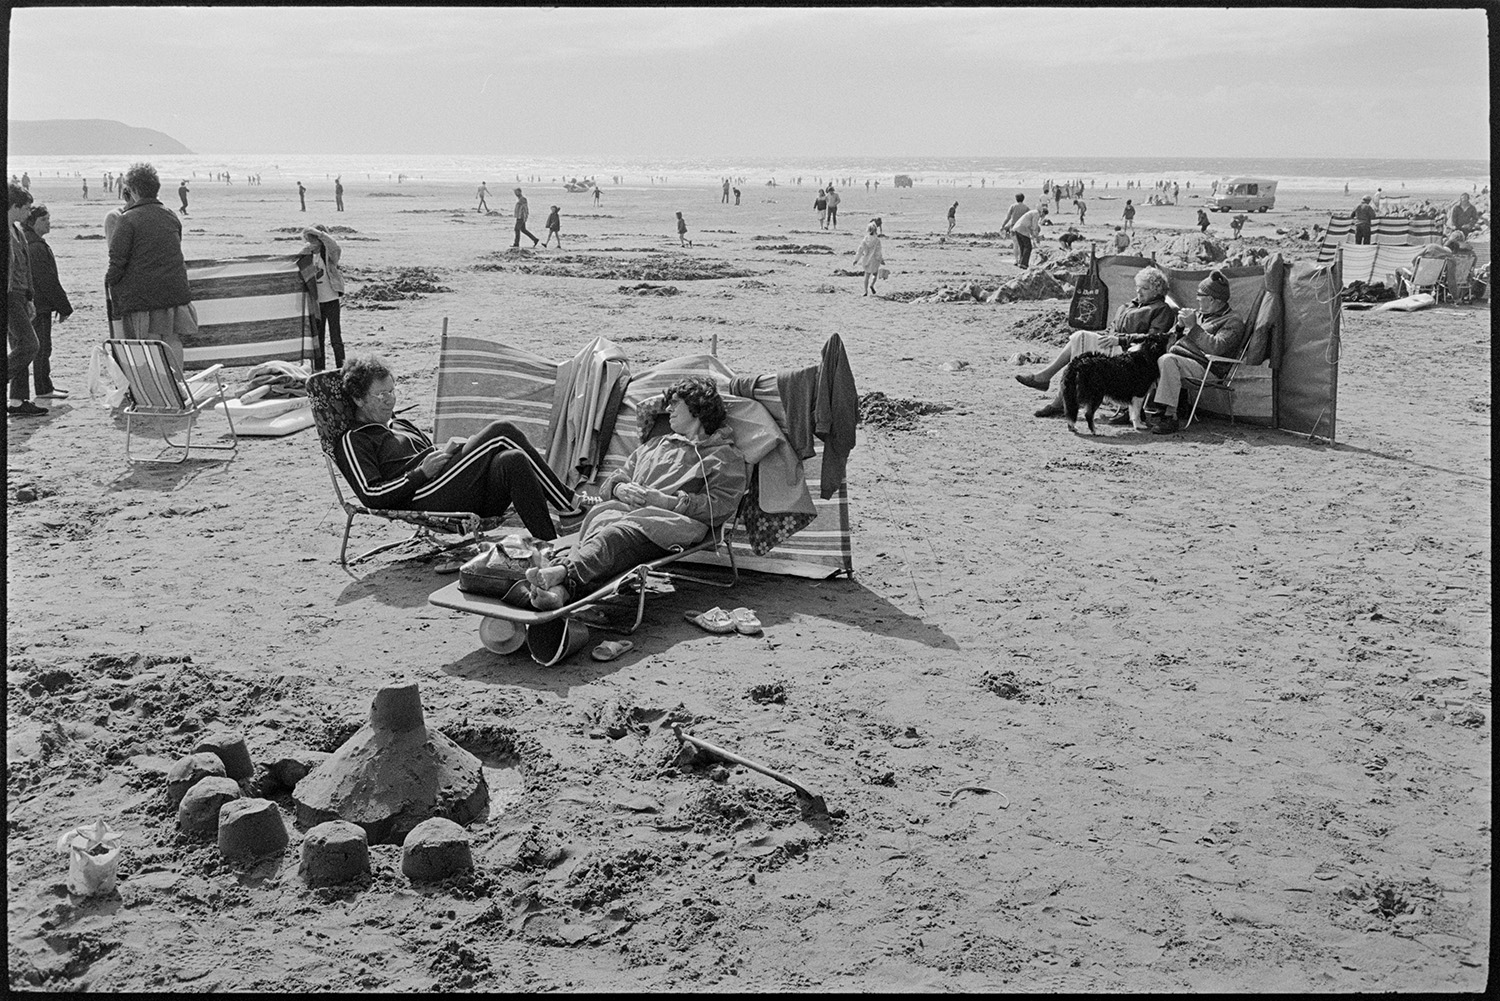 Beach scenes, people sitting behind windbreaks.
[Holidaymakers on Woolacombe beach sitting behind windbreaks, with sand castles in the foreground. An ice cream van and other holidaymakers are visible in the distance.]